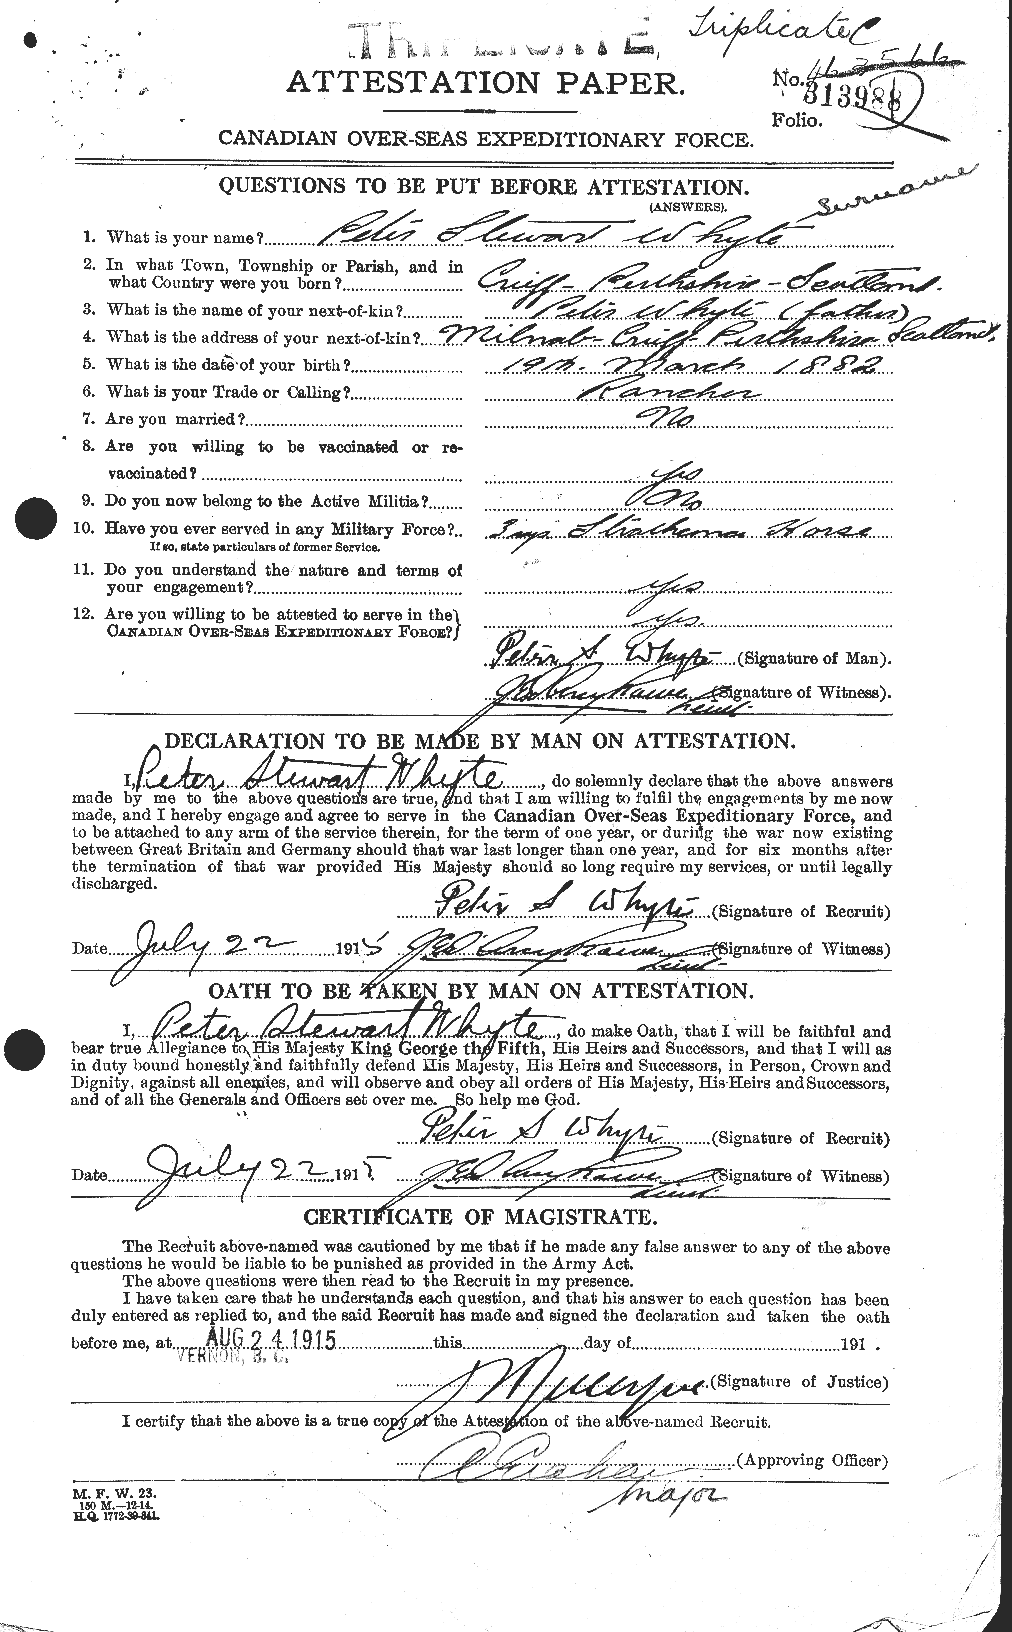 Personnel Records of the First World War - CEF 672593a